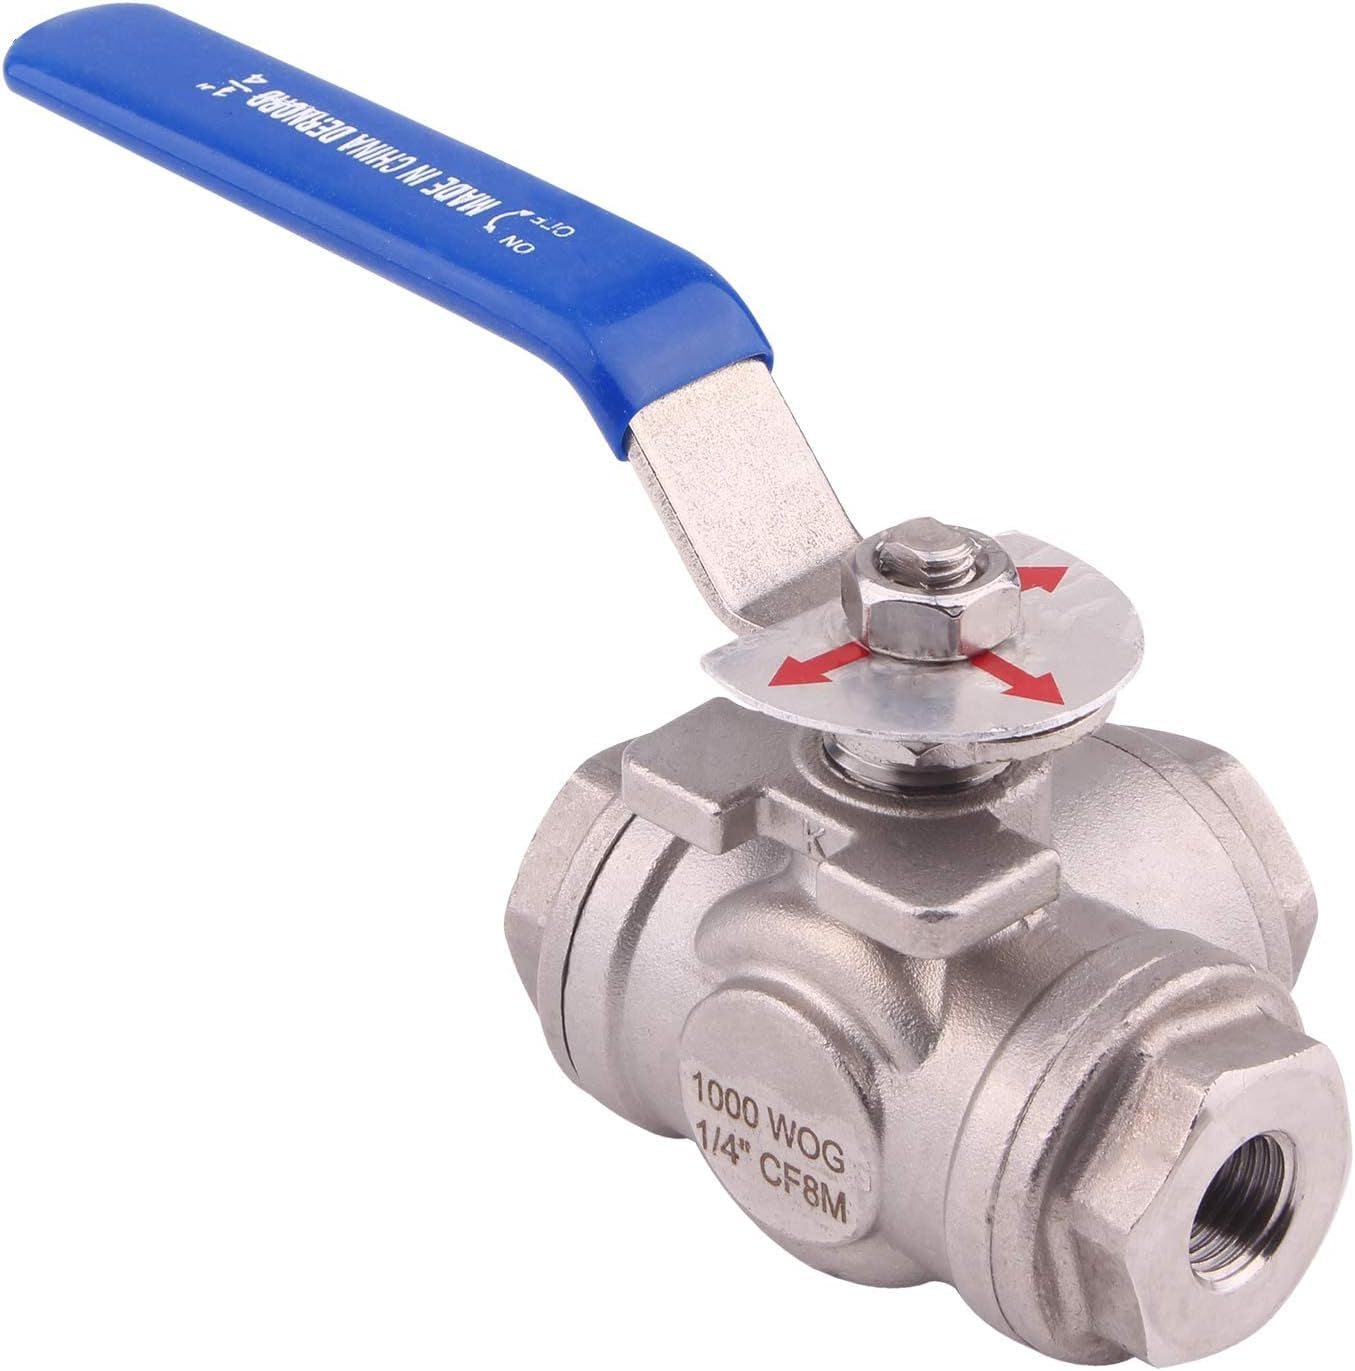 3-Way Ball Valve, T Mounting Pad, Stainless Steel 304 Female Type for Water, Oil, and Gas with Vinyl Locking Handle (1/4 Inch NPT)